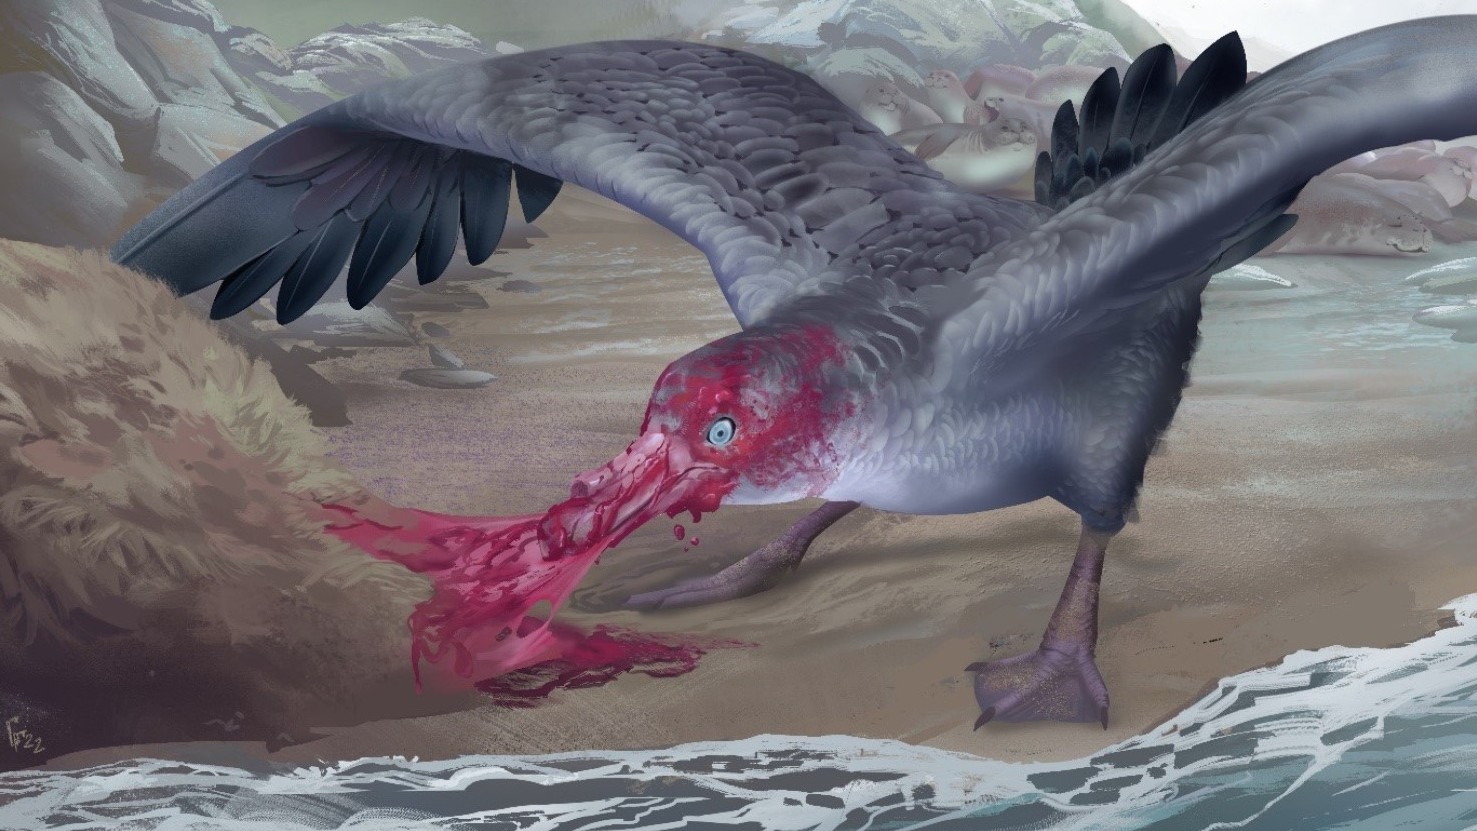 3 million years ago, this brutish giant petrel likely eviscerated dead  seals with its knife-like beak | Live Science